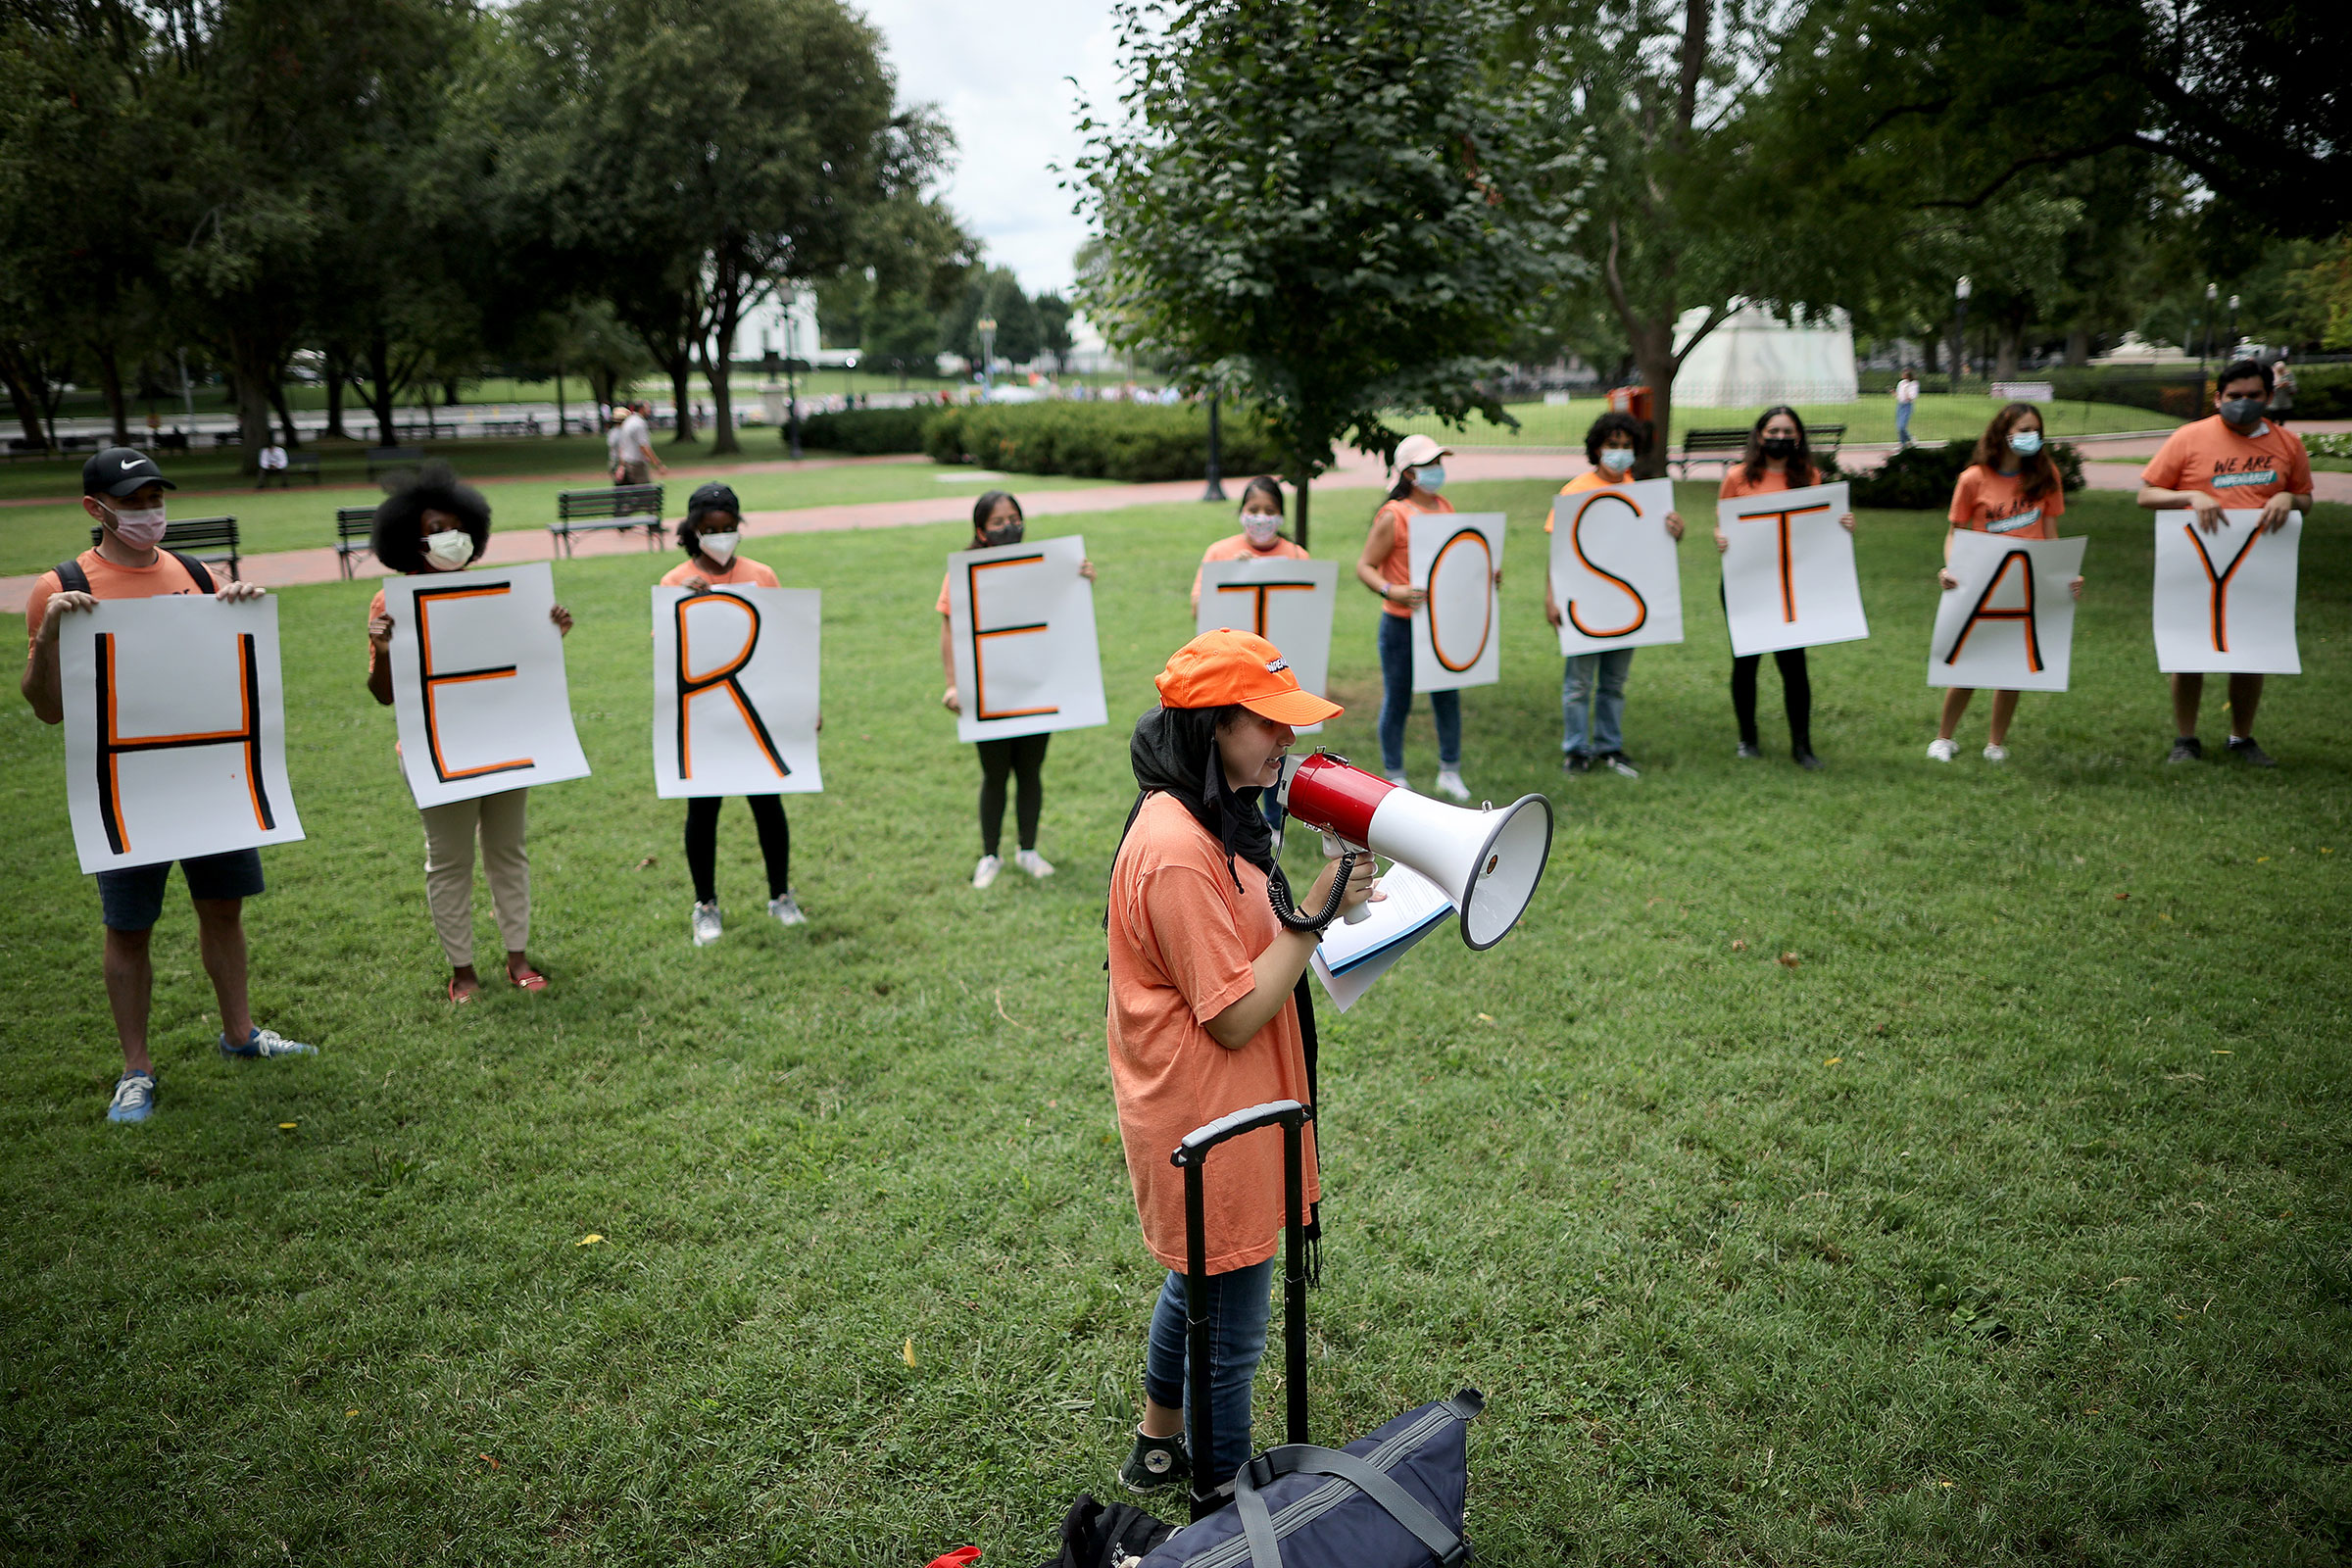 Activists demand that Congress and the Biden Administration create a path for citizenship for millions of immigrants while rallying in Lafayette Park across from the White House on Aug. 17, 2021. (Chip Somodevilla—Getty Images)